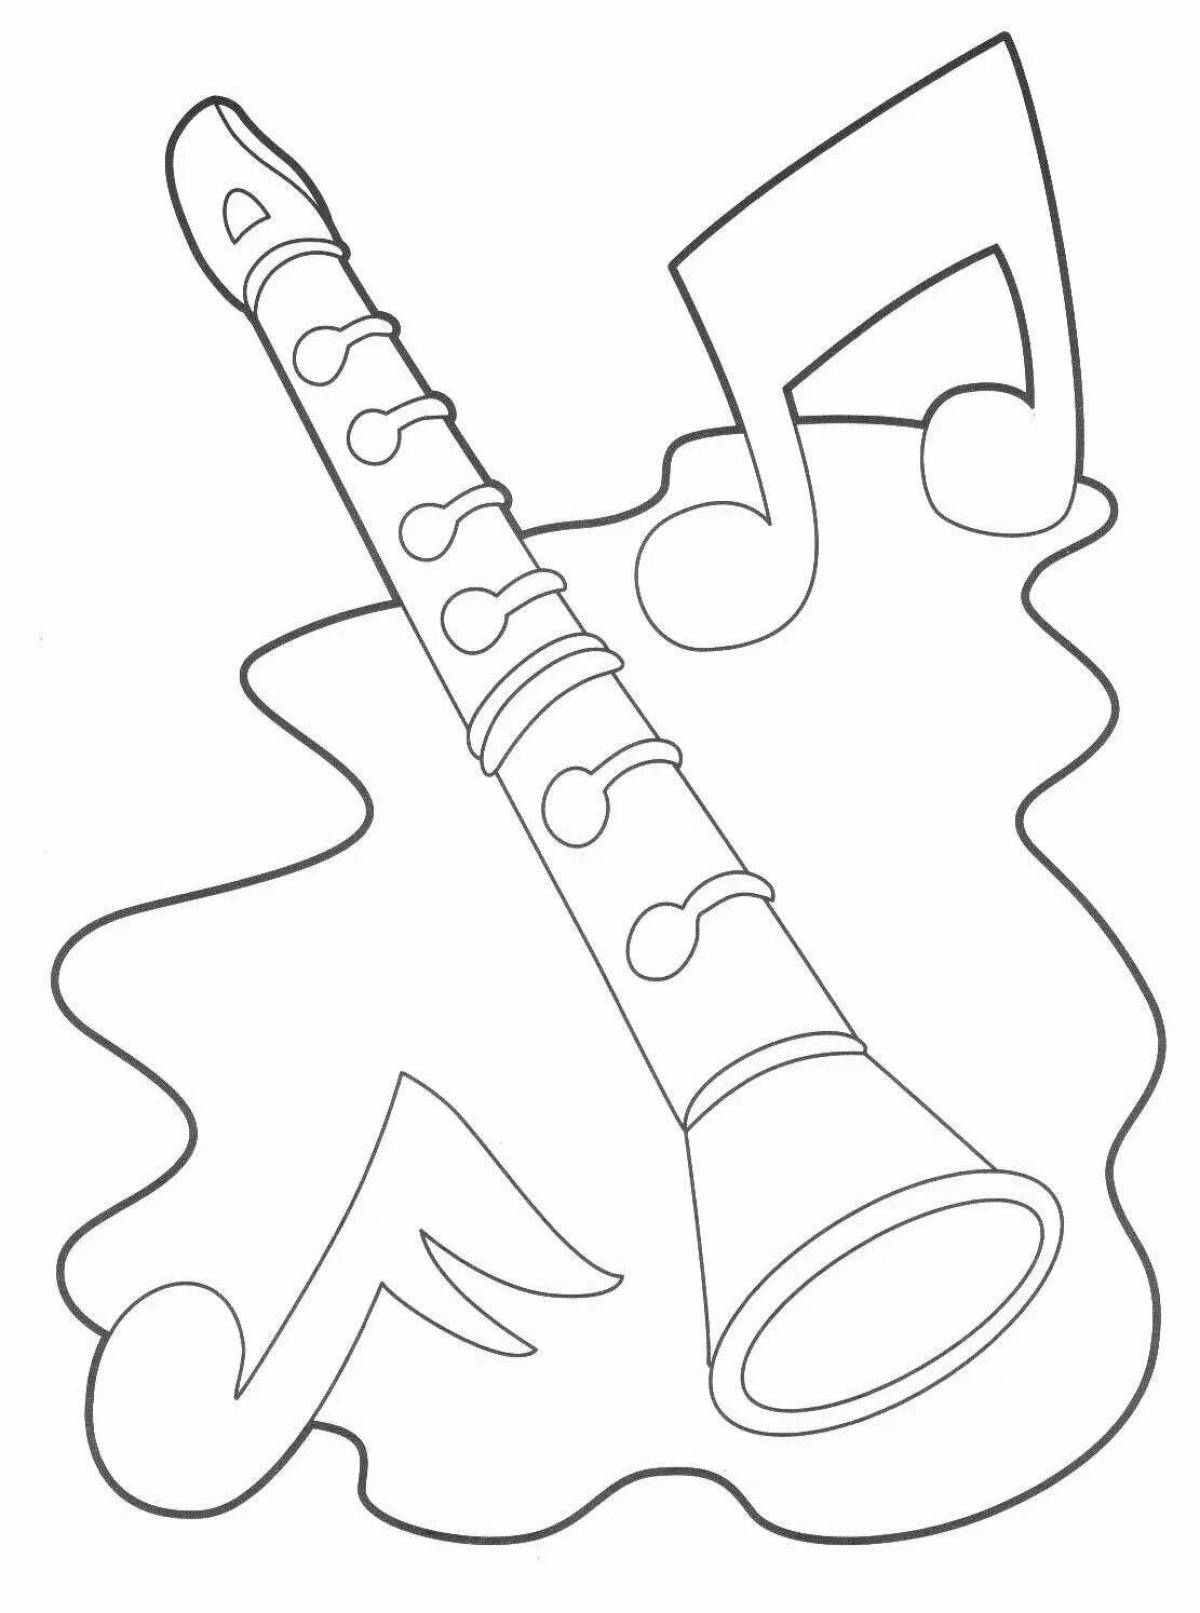 Fabulous tube coloring page for kids